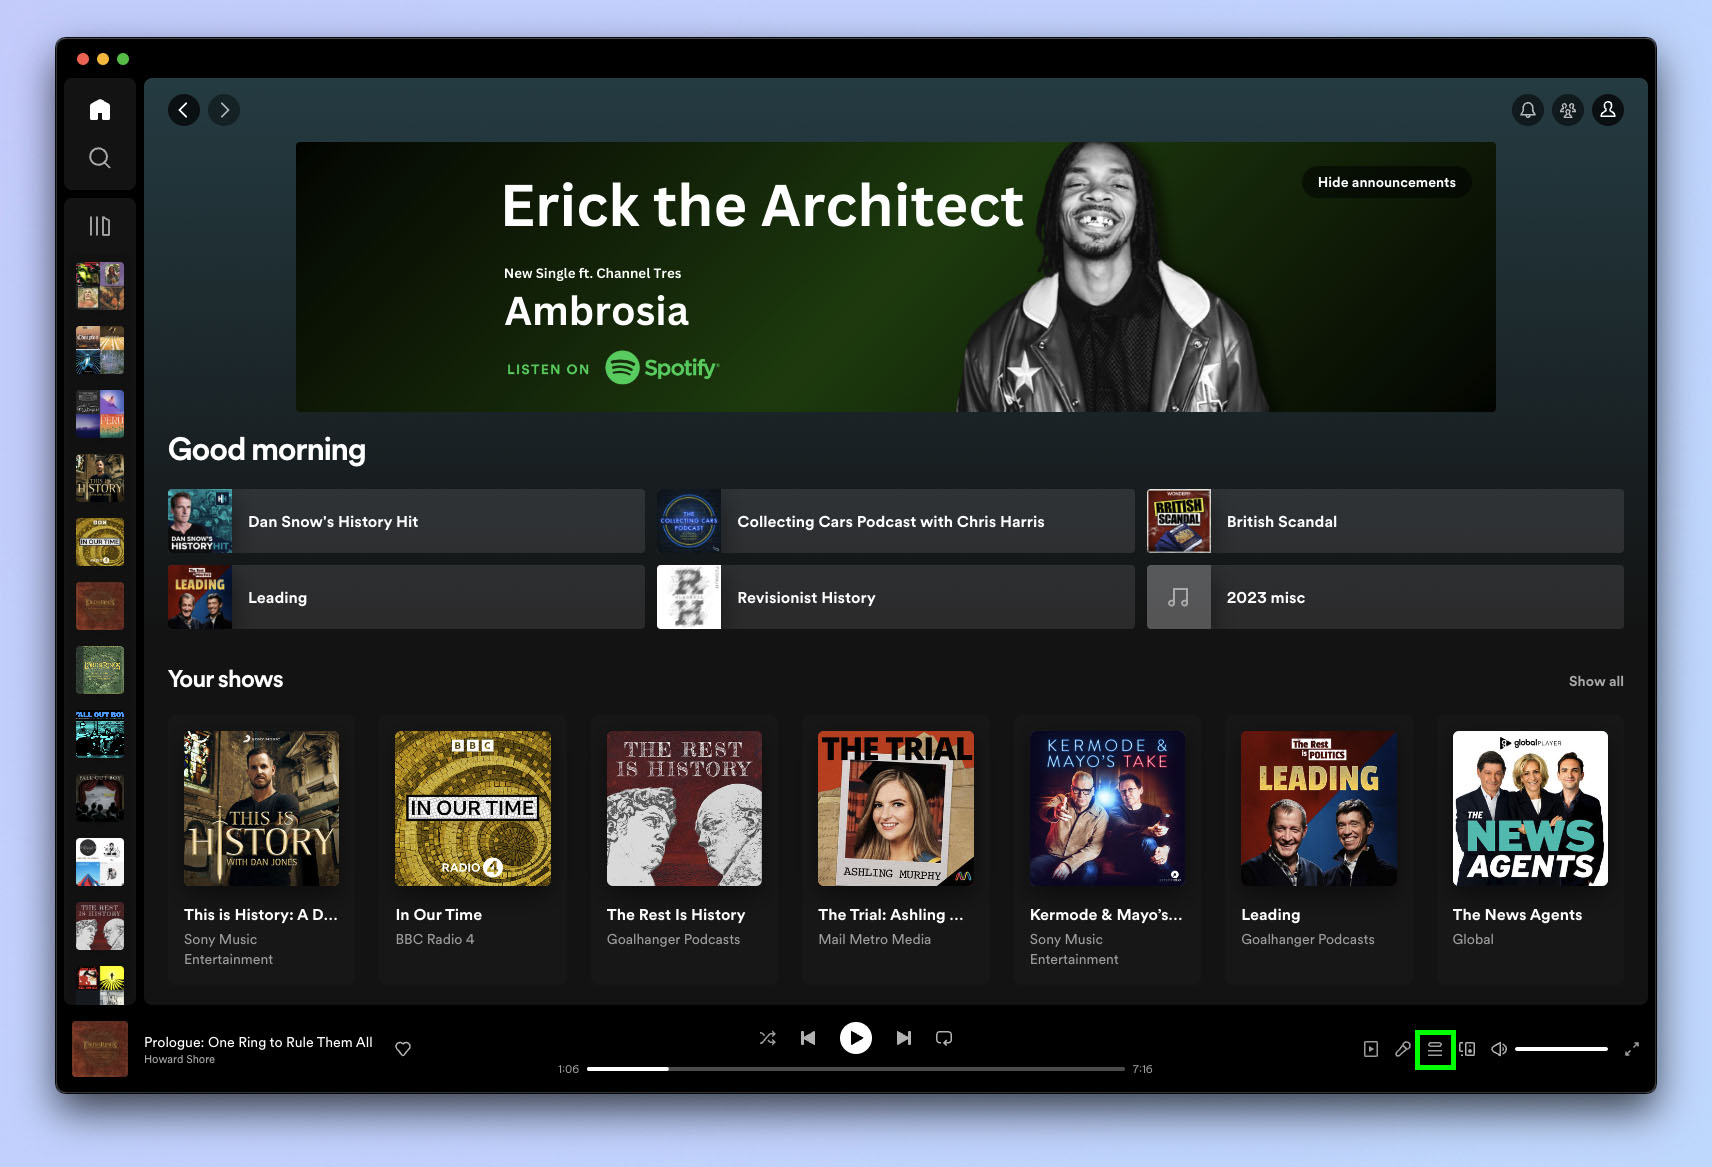 How to View Listening History on Spotify Desktop App